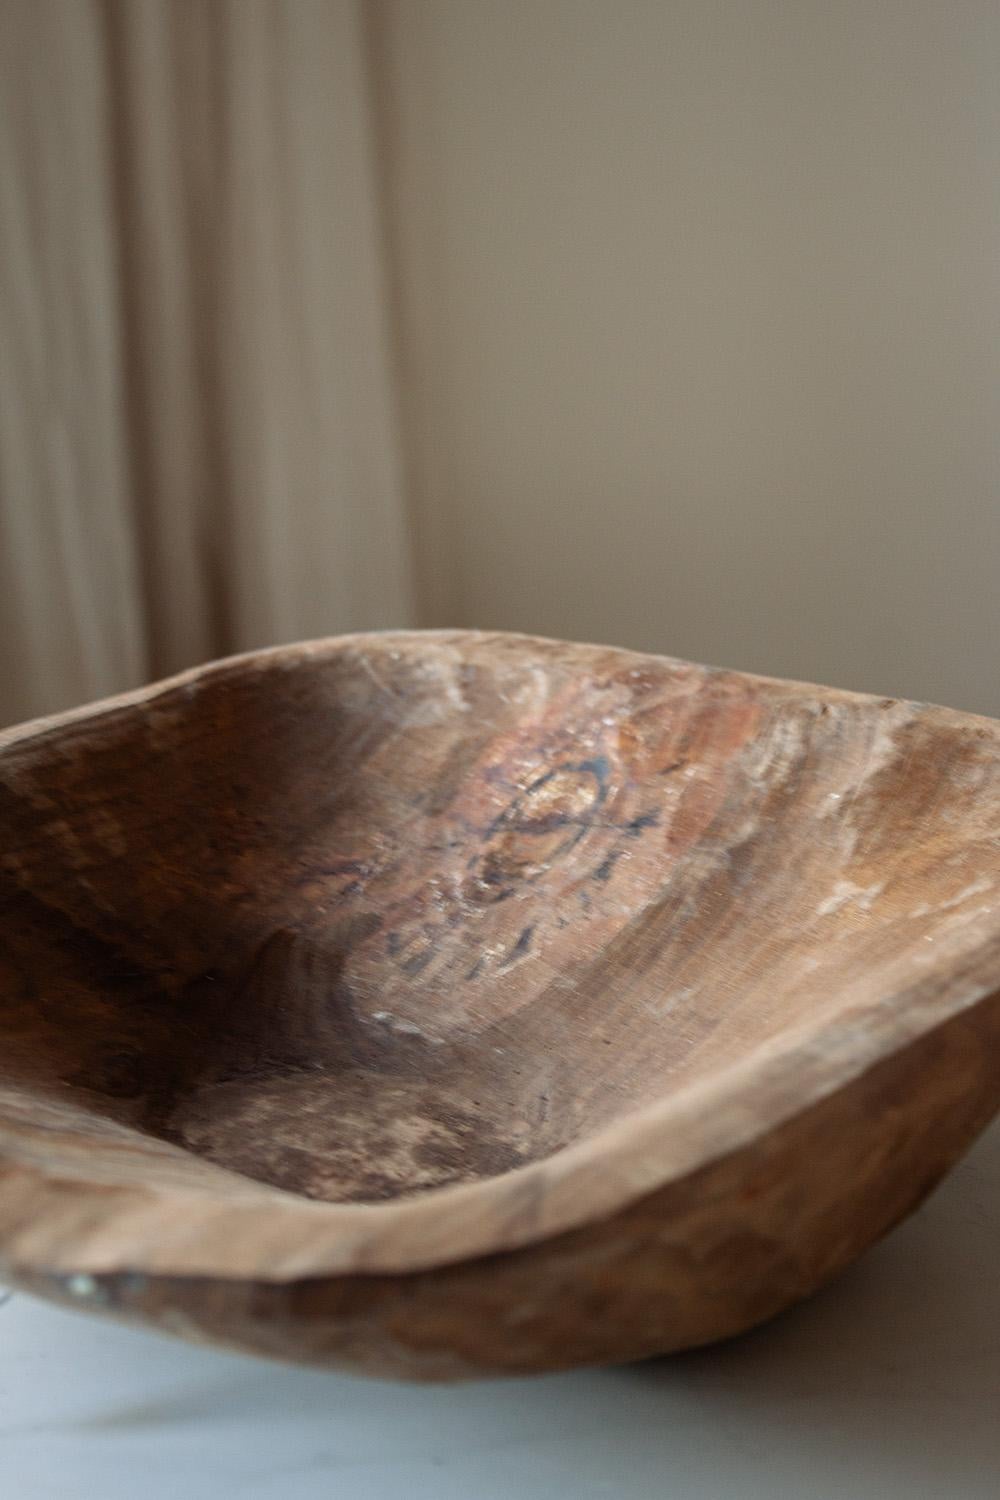 Contemporary French Provincial Hand Made Wooden Bowl Nr.3 For Sale